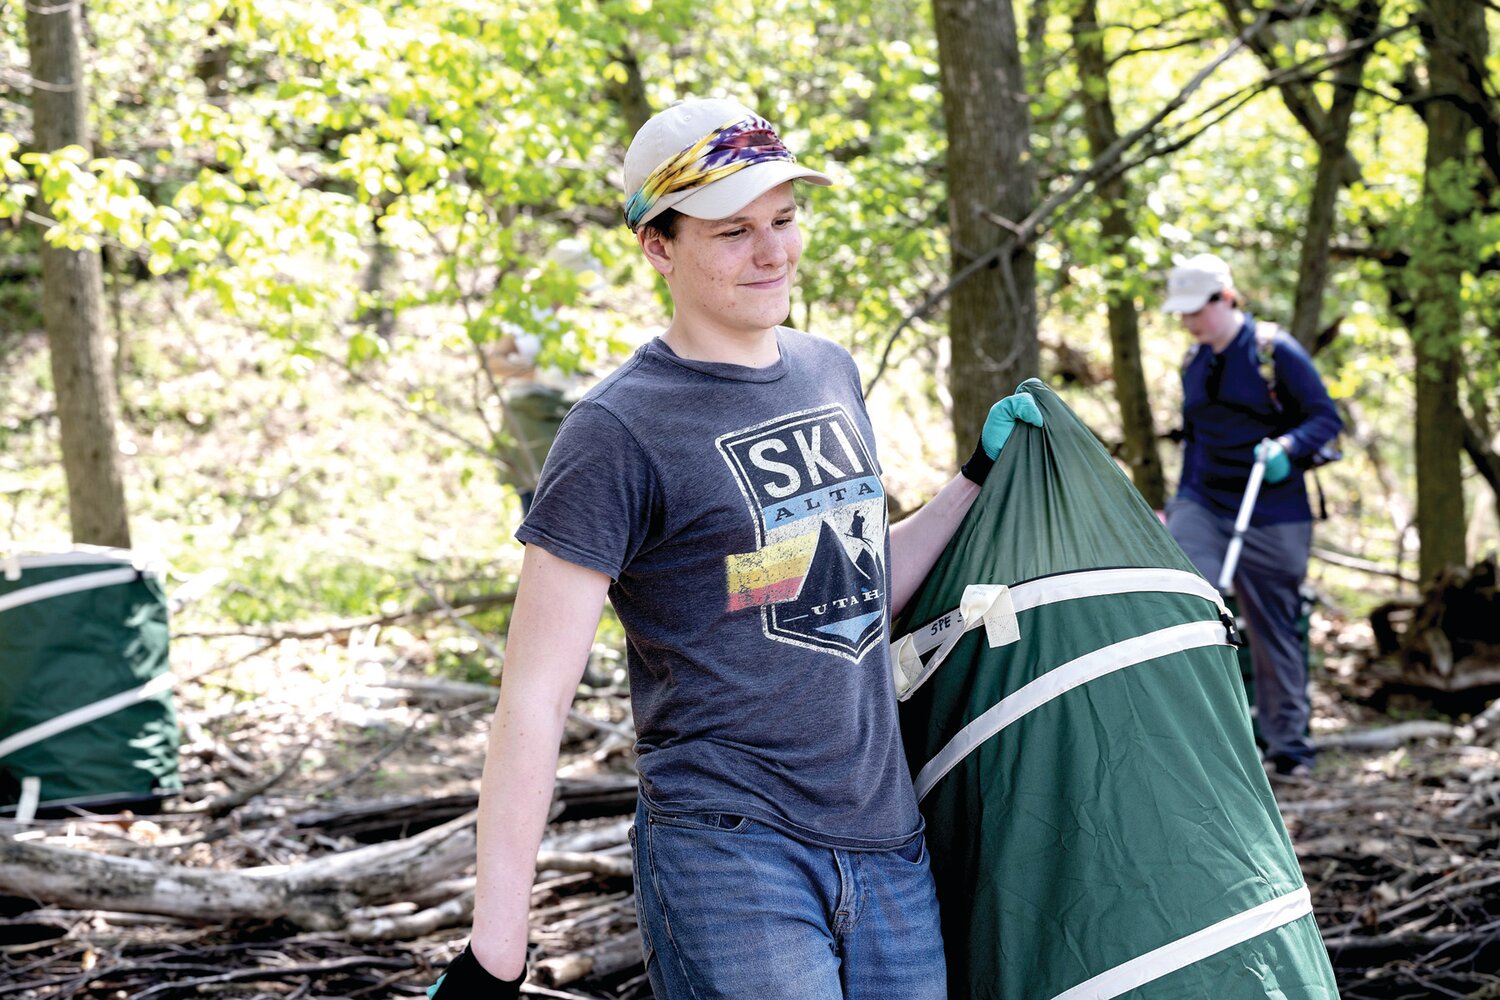 A student volunteer from the Bucks Learning Cooperative transports a bin of plastic waste on Burlington Island. Spearhead Project Earth plans to train 300 volunteers for environmental cleanup efforts by the end of 2023.